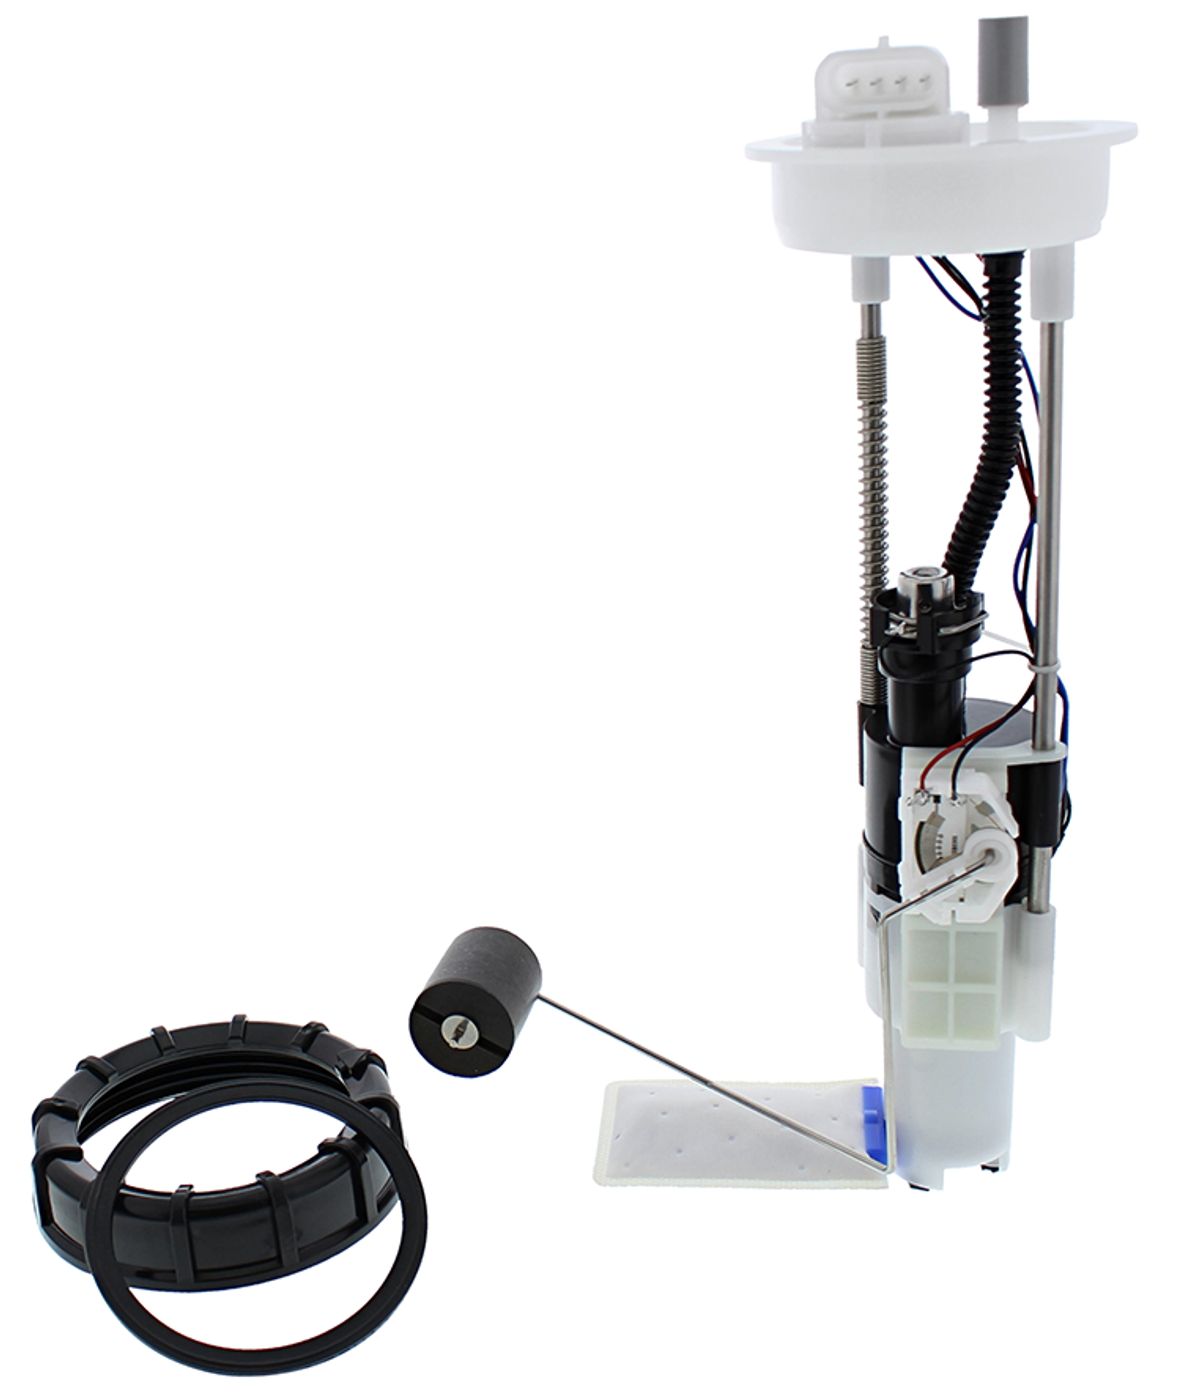 Wrp Fuel Pump Modules - WRP471010 image